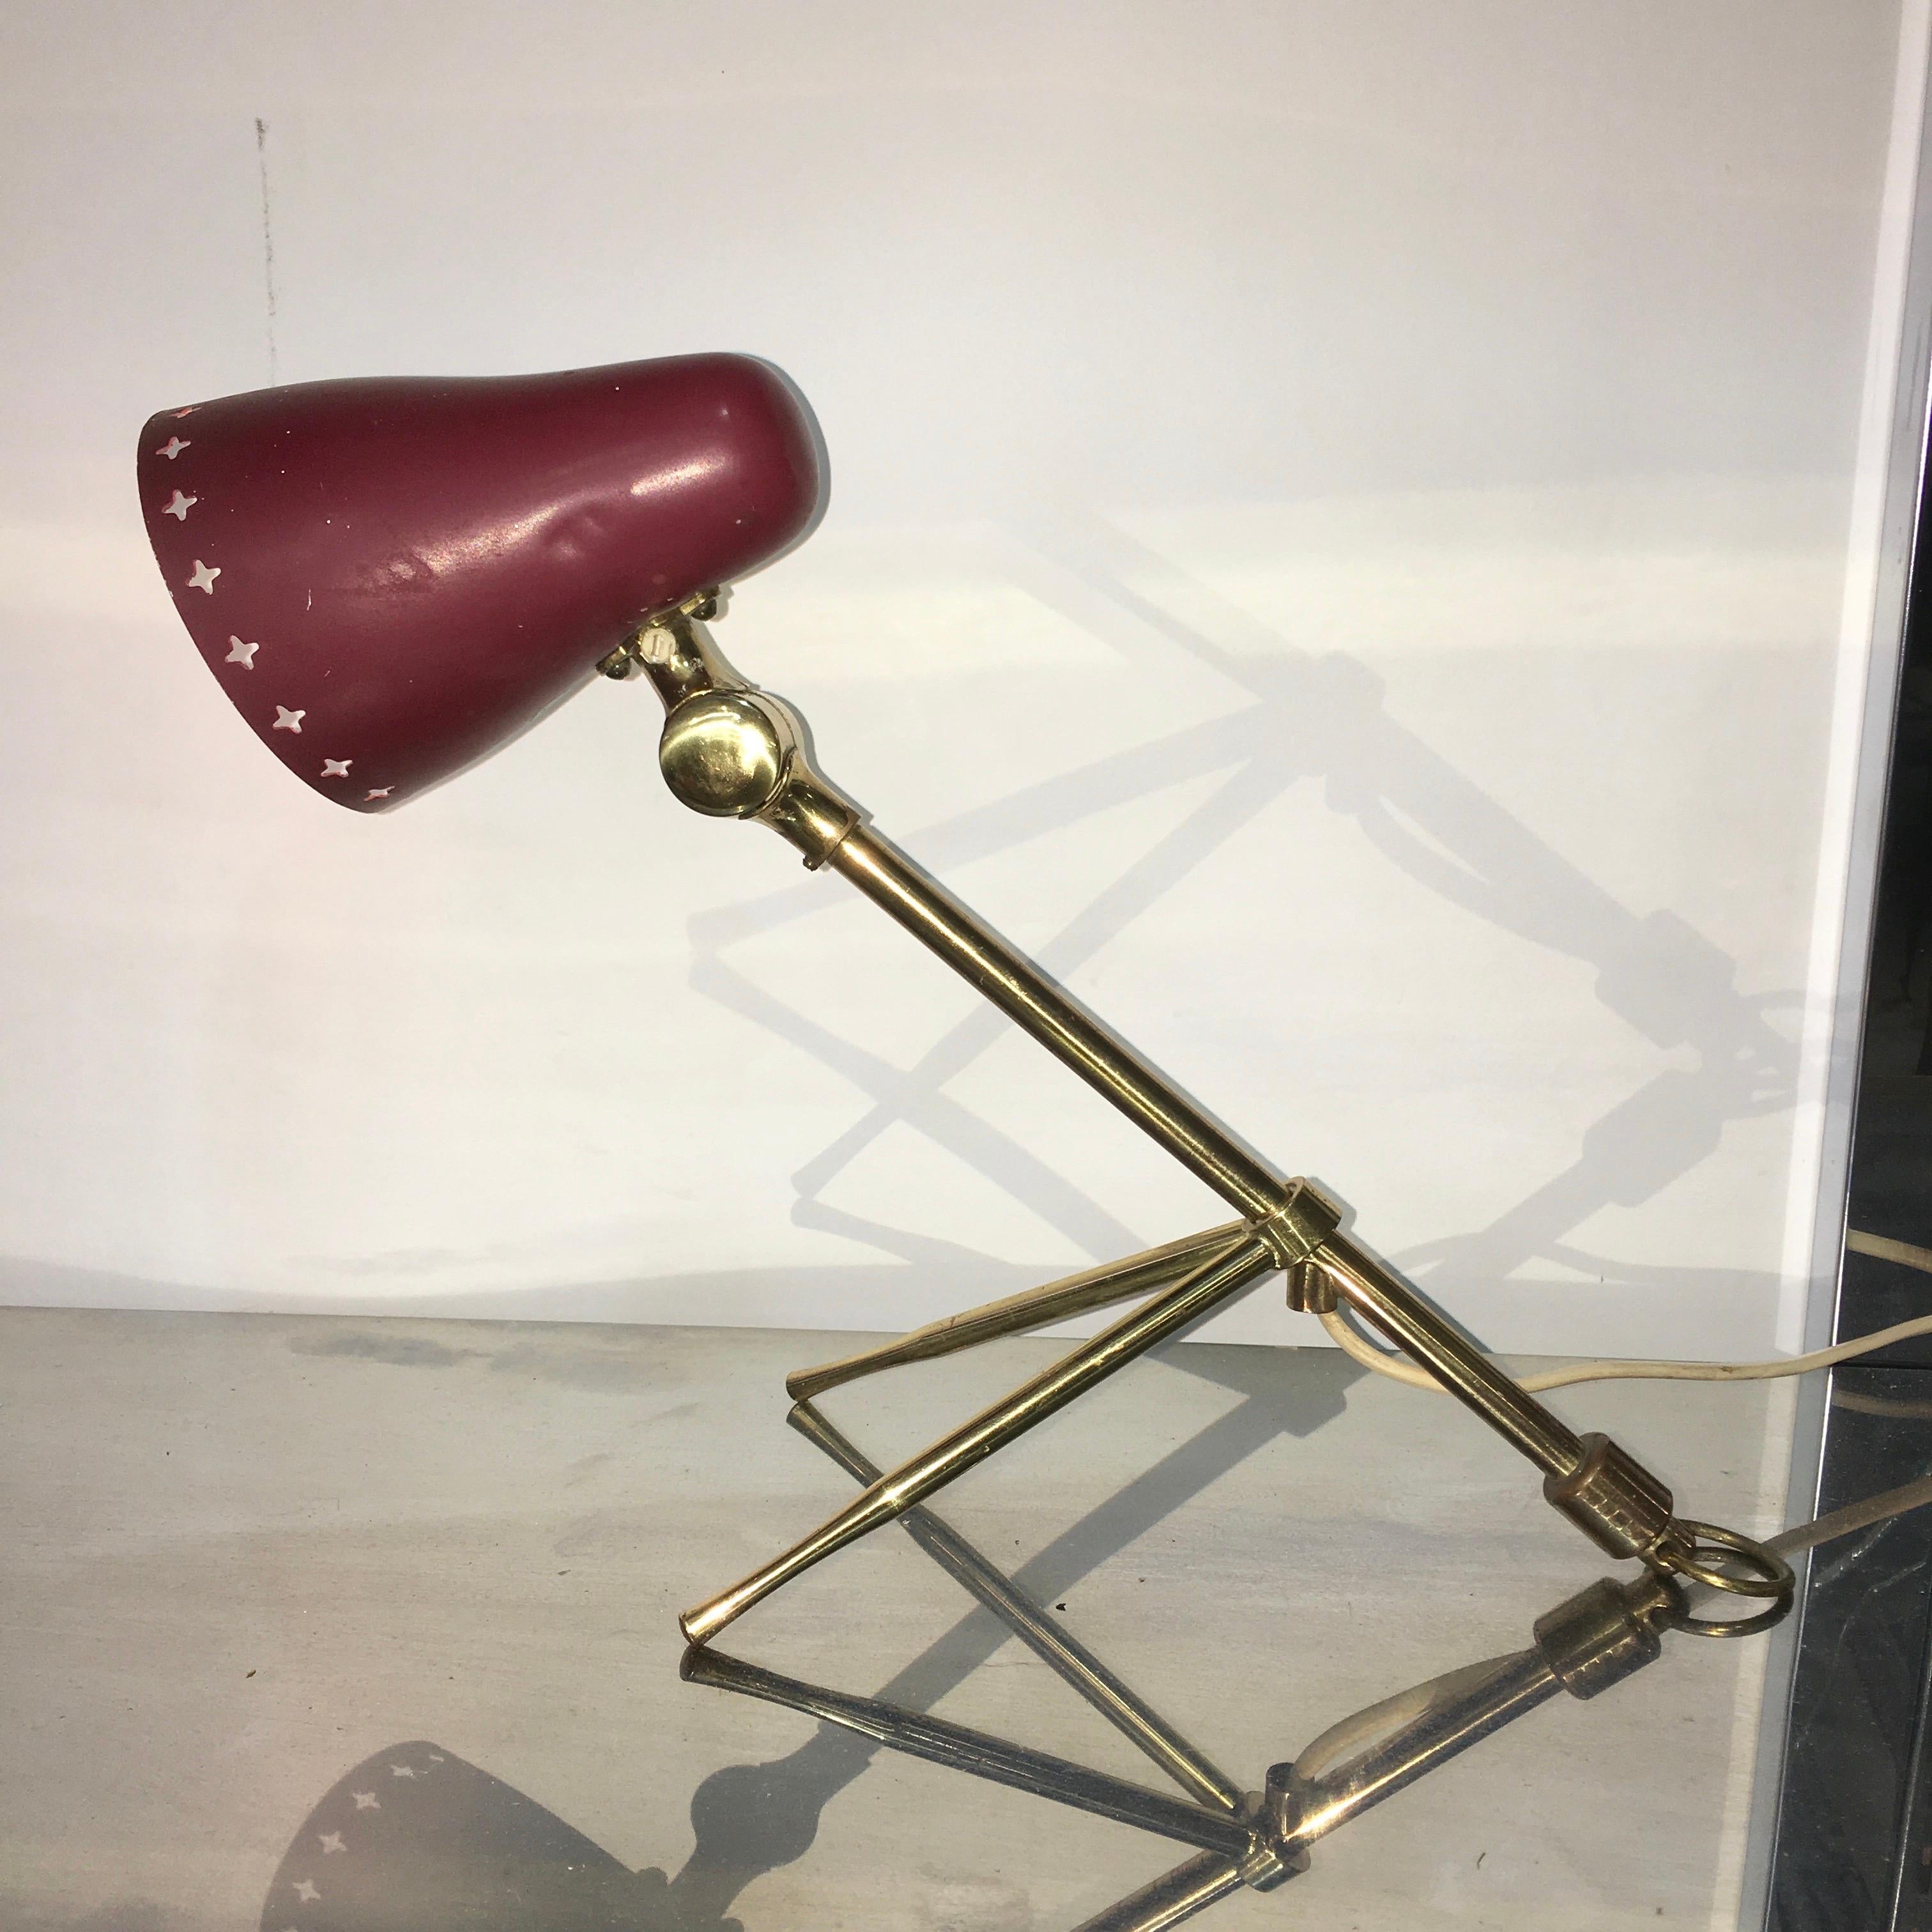 Another charming anthropomorphic early 1950's Swedish lamp with versatility either to hang on a wall or stand on a desk or table top. Fully articulating shade. Takes a single candelabra E14 or E12 bulb up to 60 watts. Often confused with similar